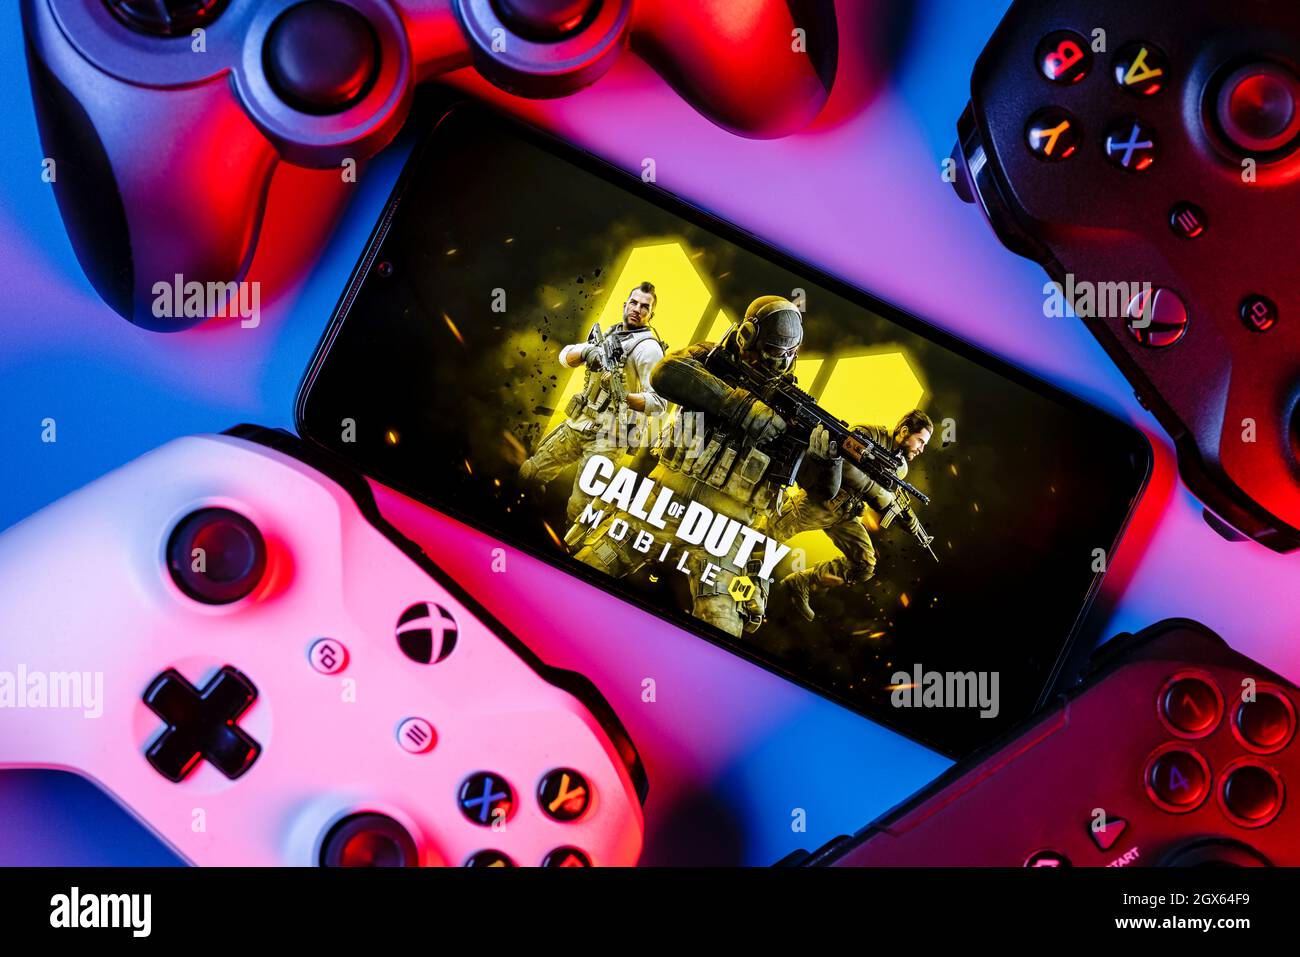 A smartphone with the frame from Call of Duty on the screen surrounded by gamepads. Stock Photo